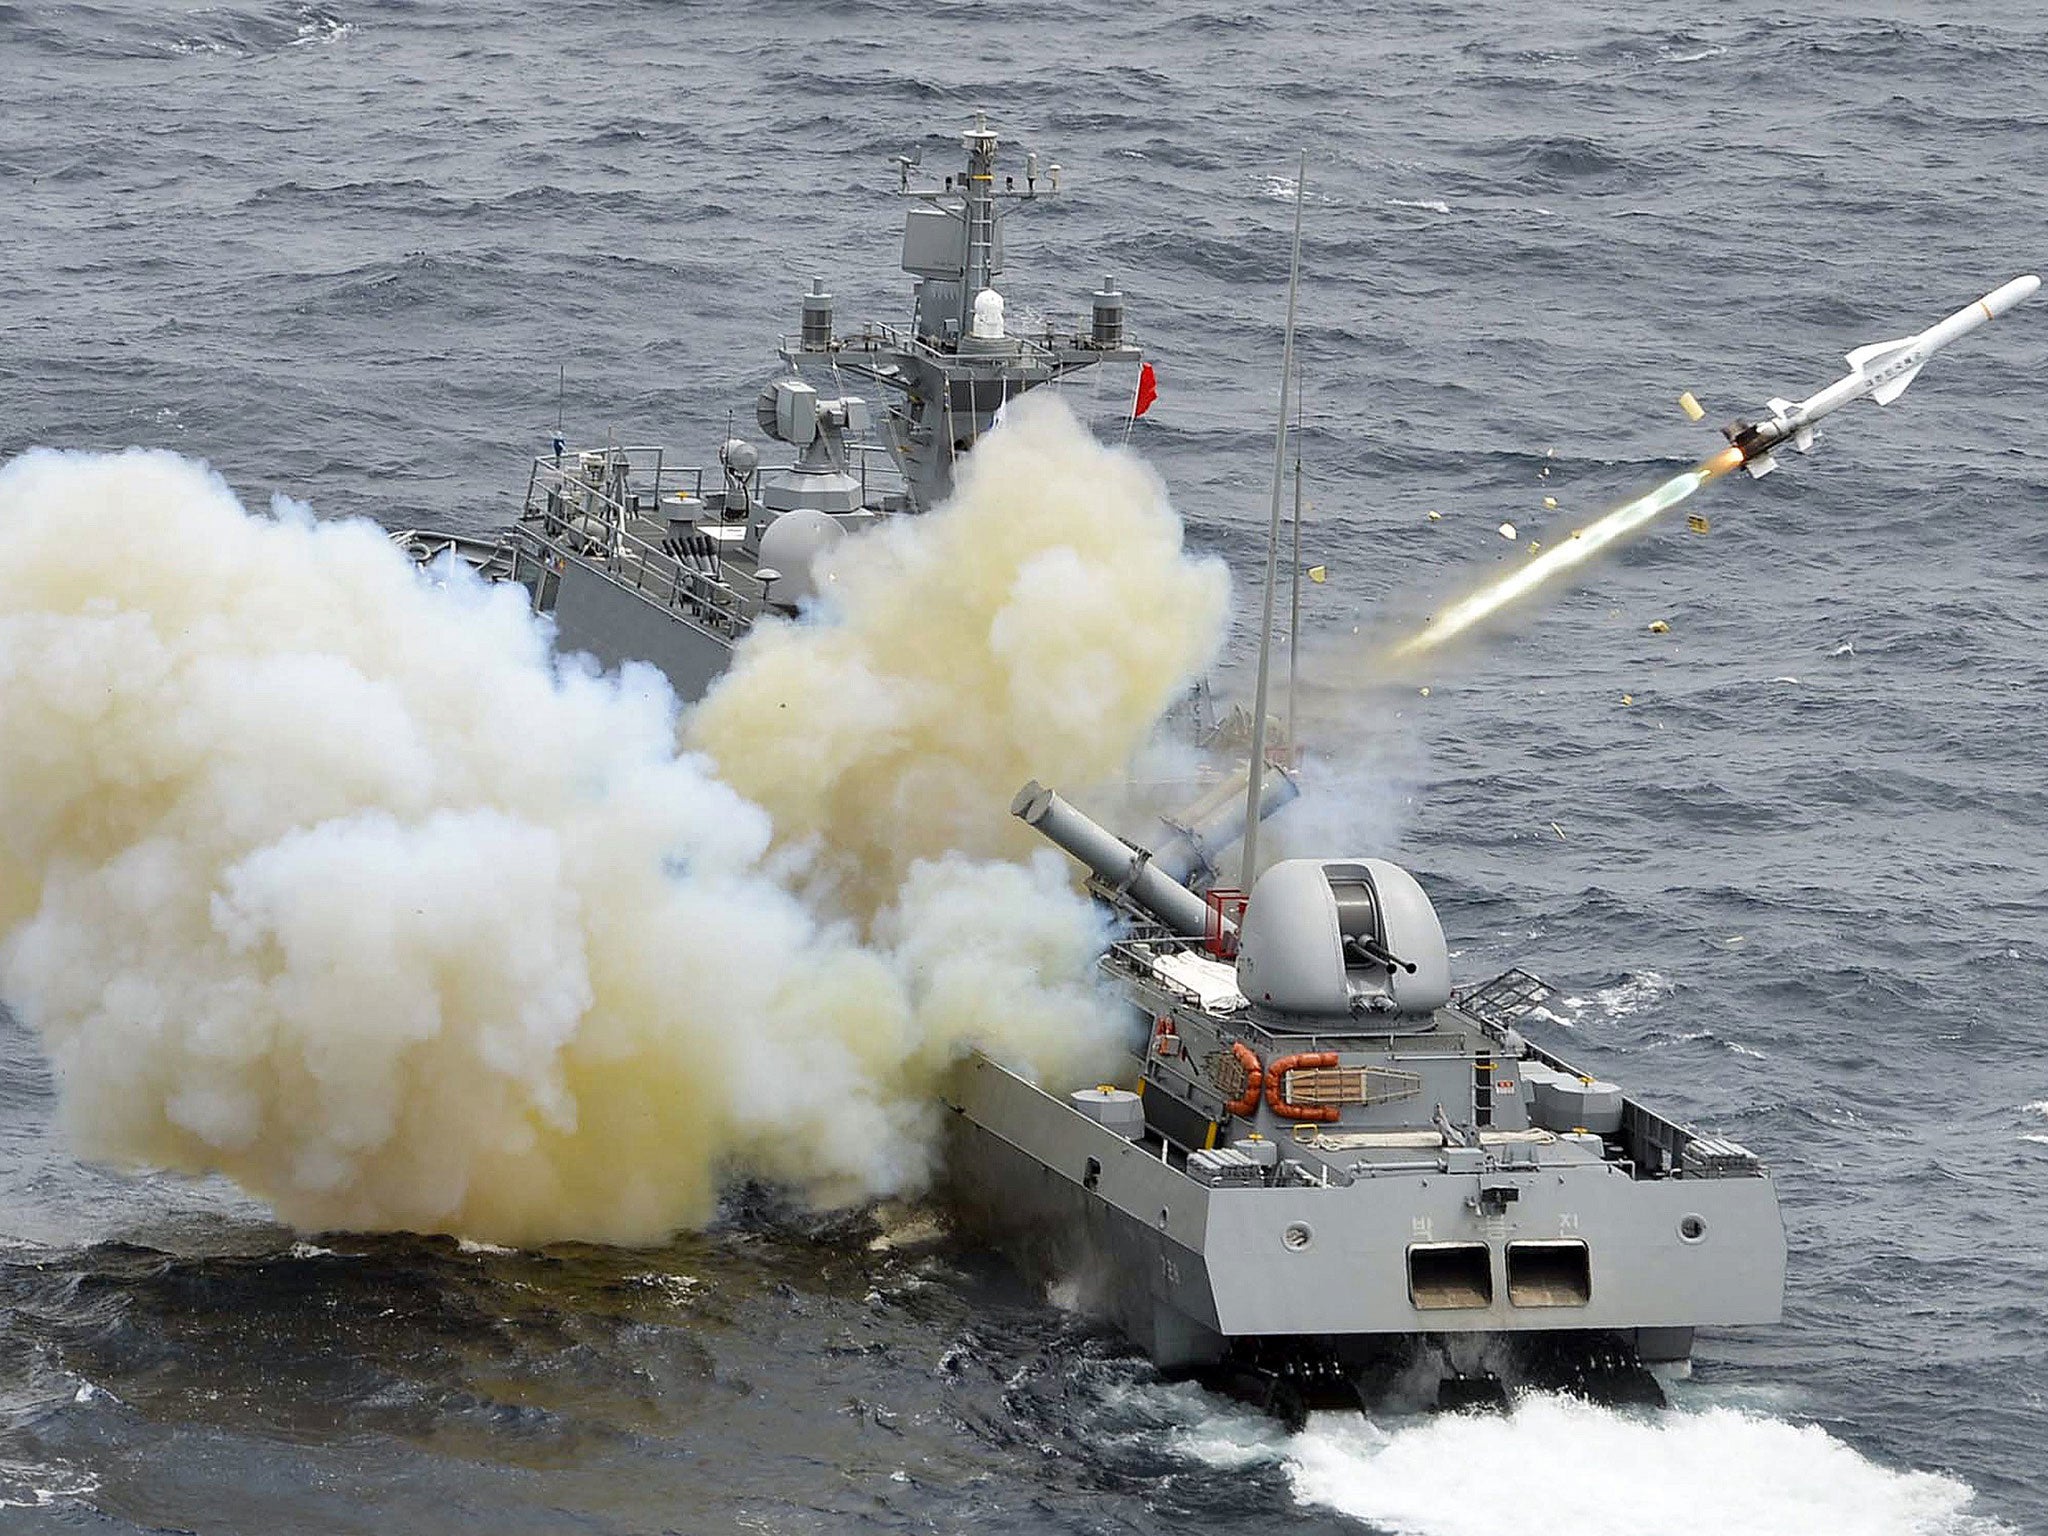 South Korean Navy's Guided Missile Patrol Gun Boat fires a harpoon missile during a live firing exercise against a possible invasion by North Korean submarines near islands called Dokdo in South Korea and Takeshima in Japan